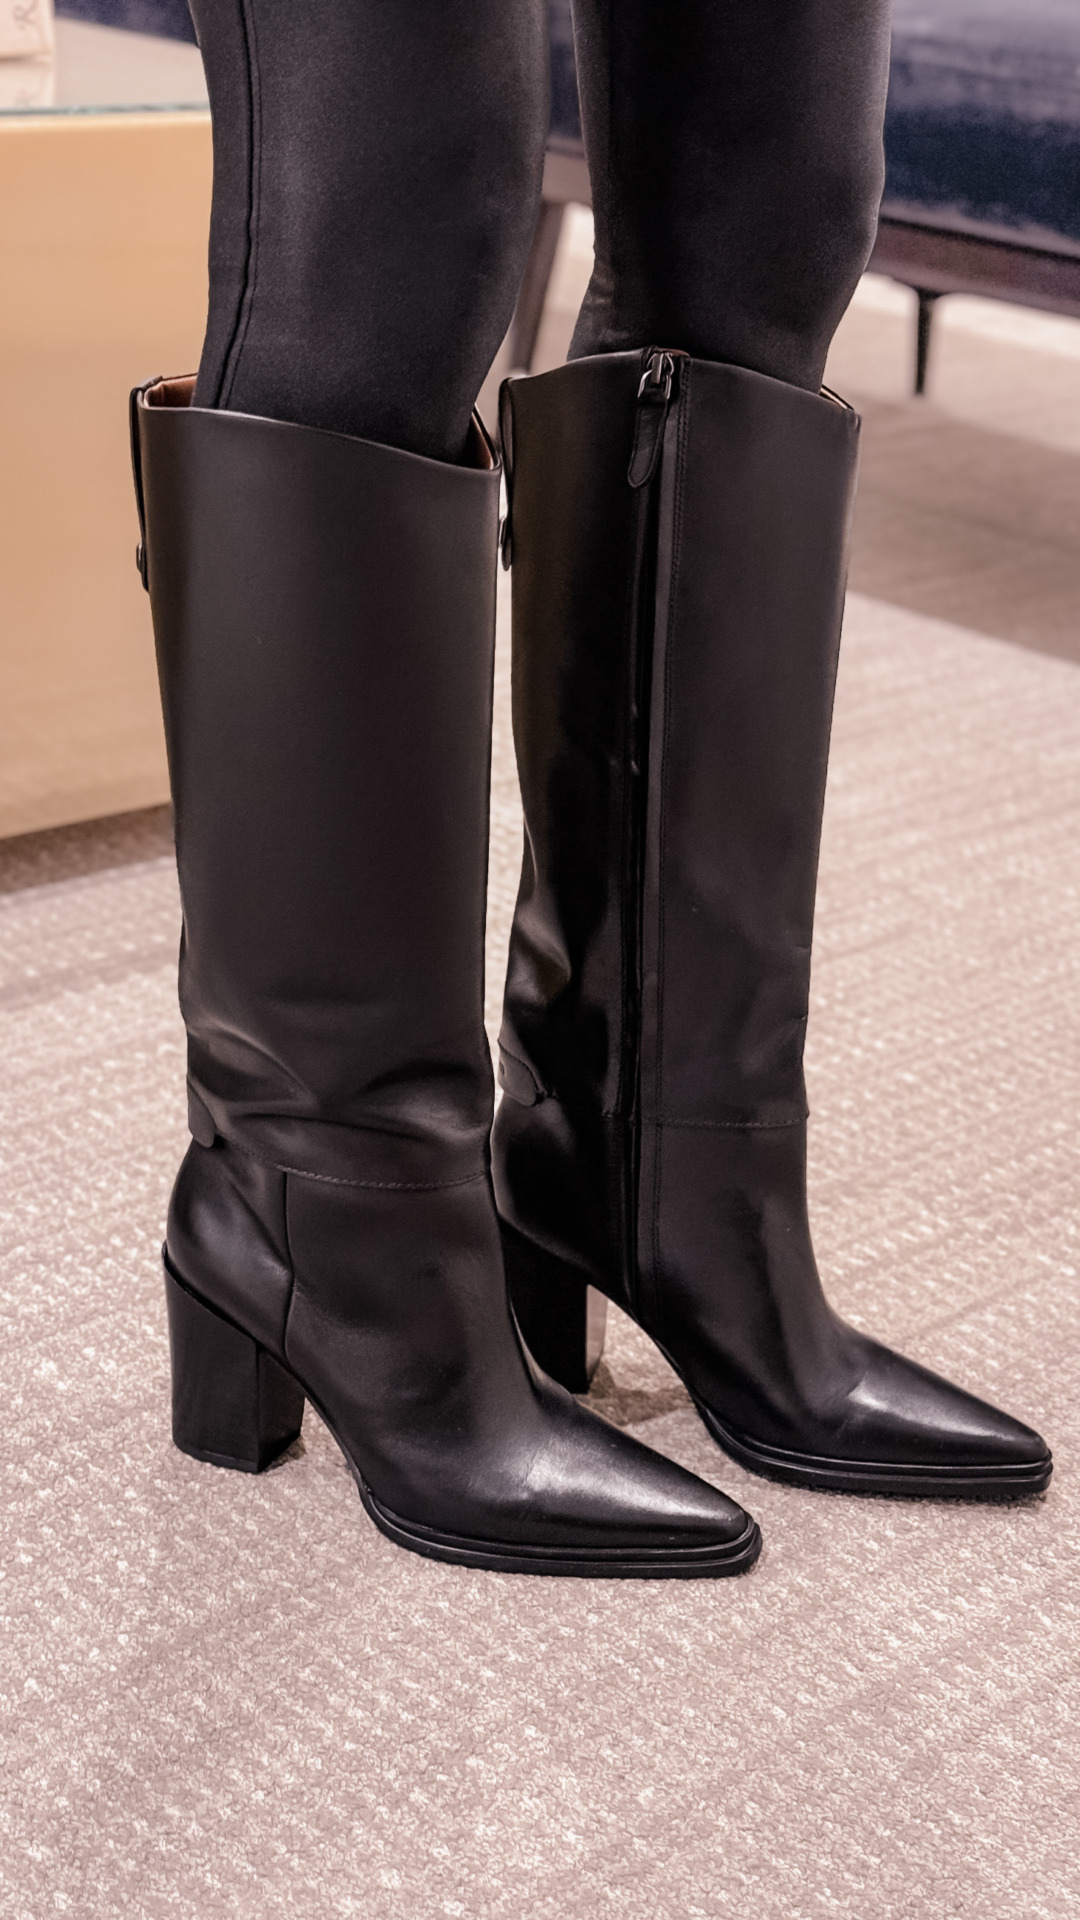 Franco Sarto Knee-High Boots | The Best 20 Items in the Nordstrom Sale